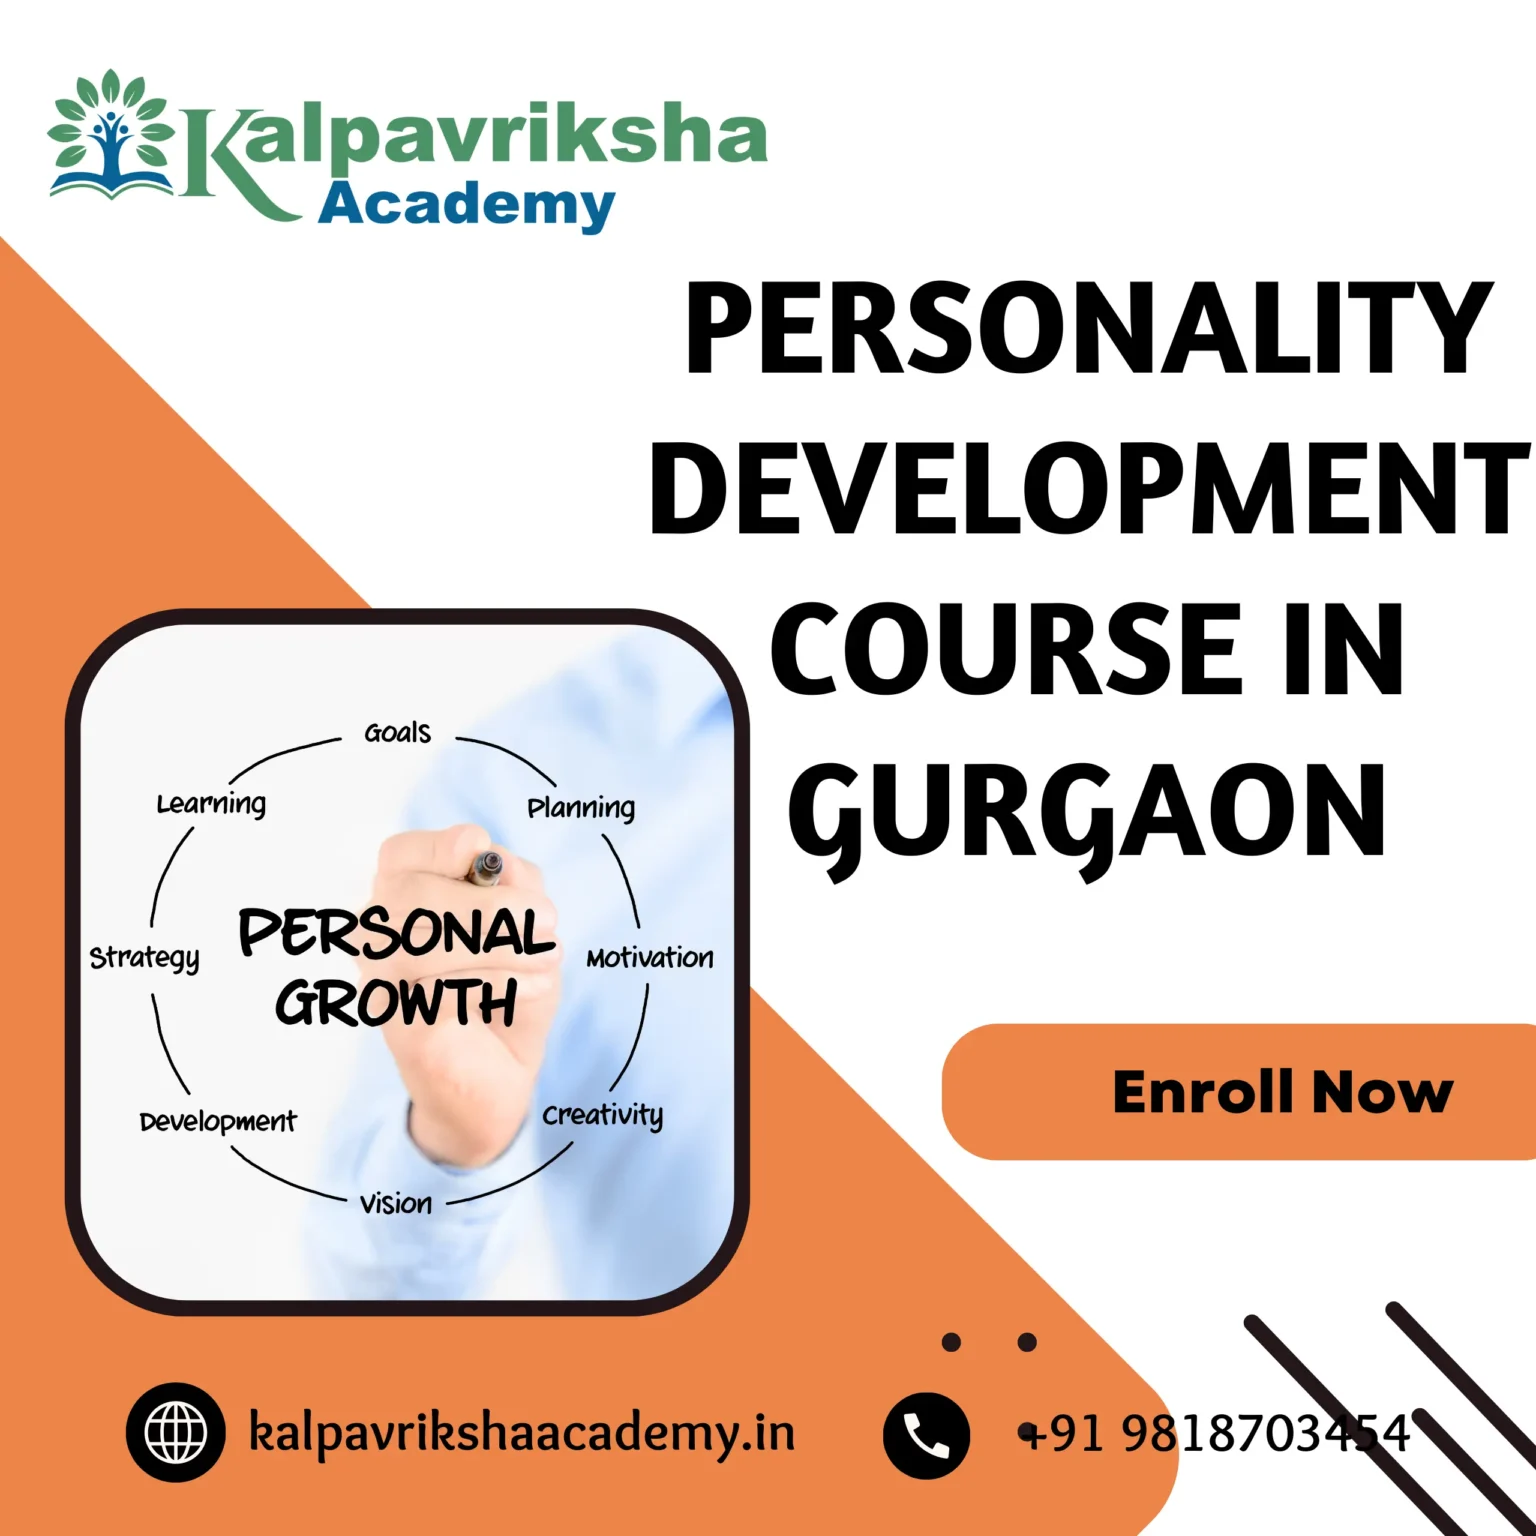 Online Personality Development Course in Gurgaon